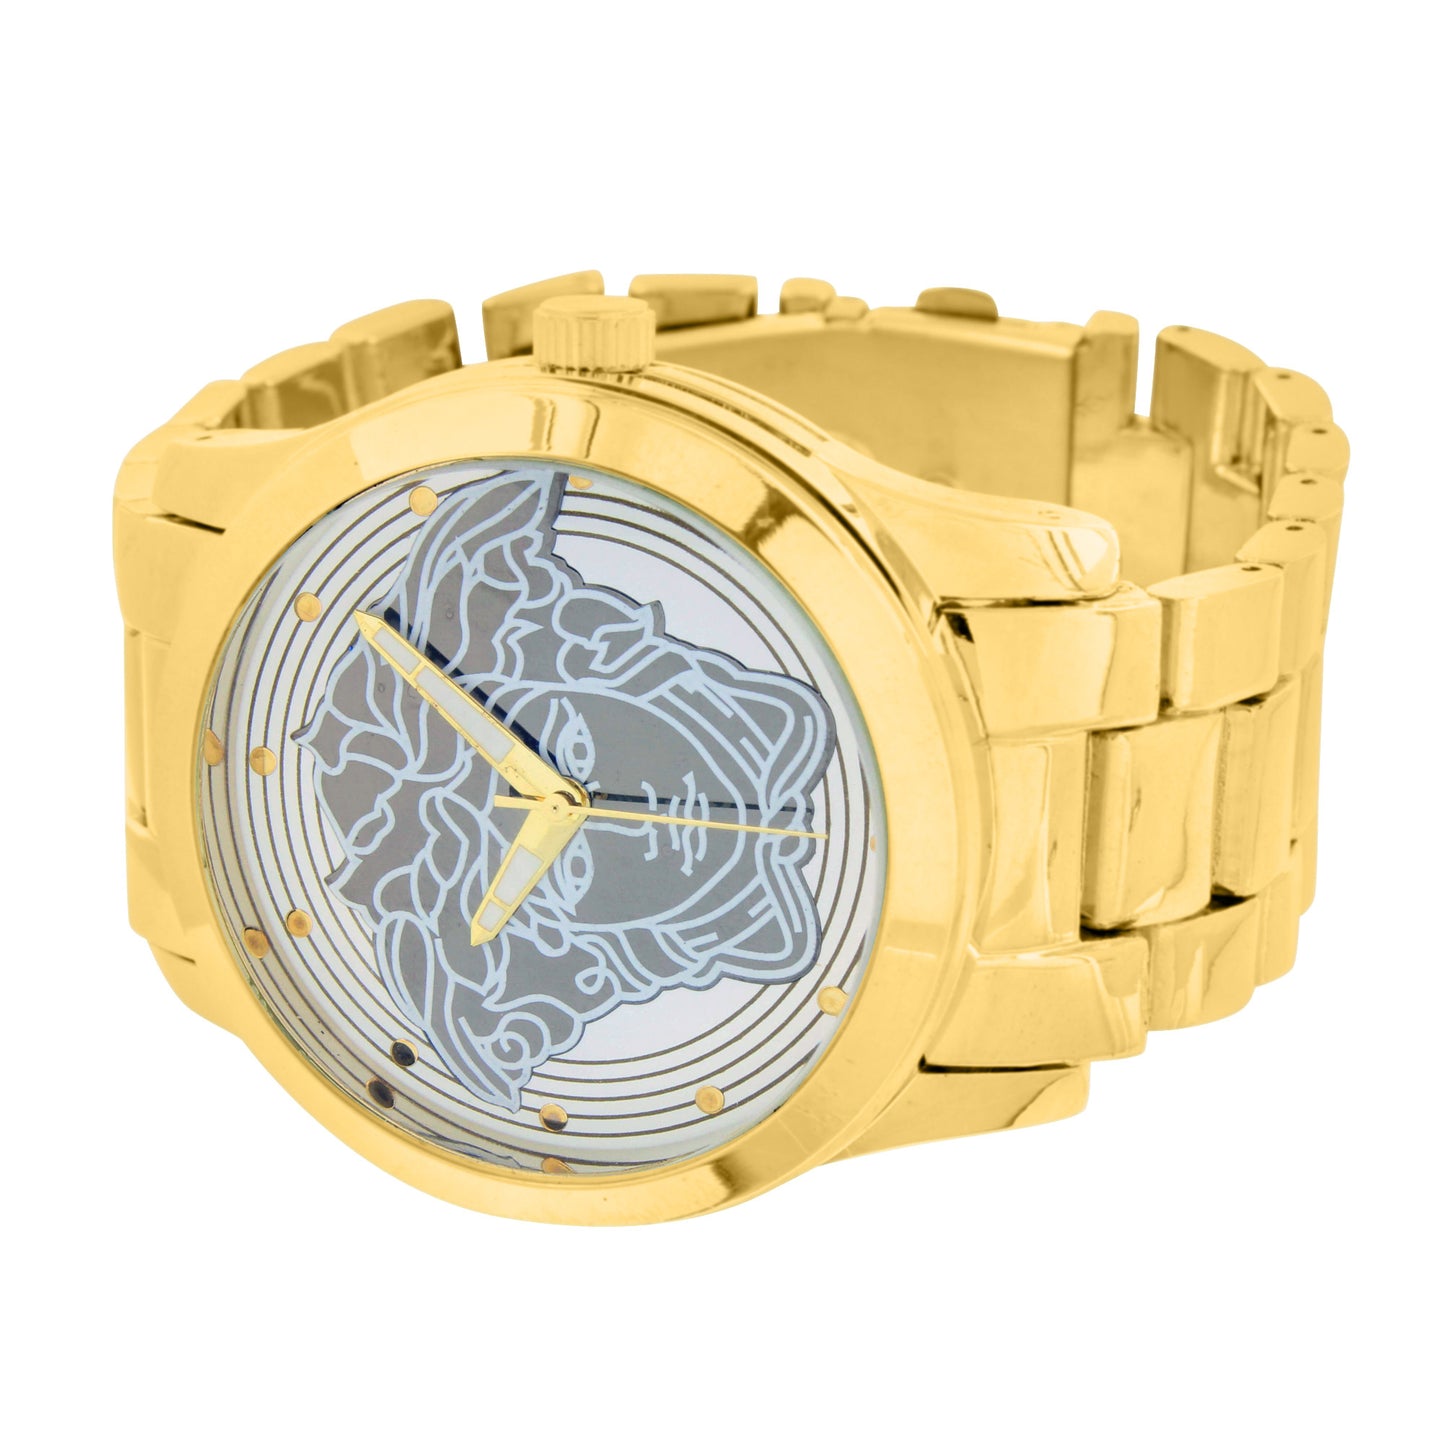 Gold Finish Watch Medusa Face Dial Metal Band